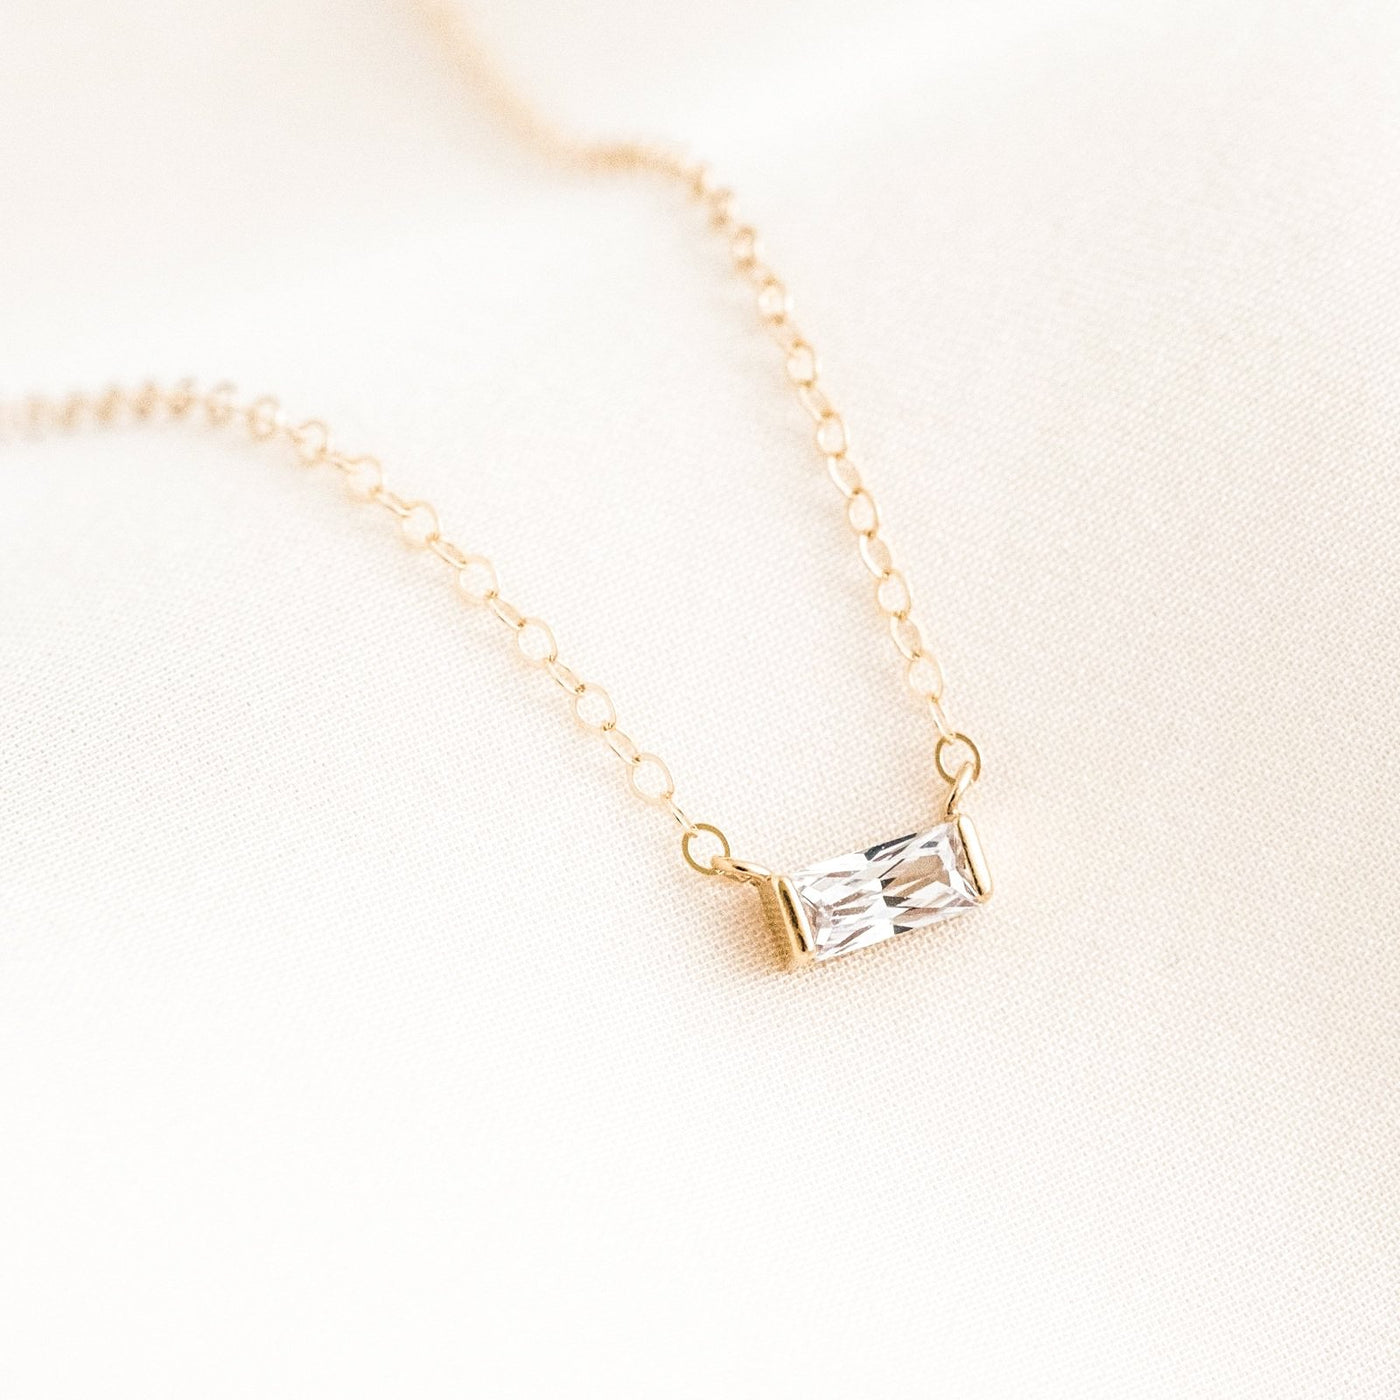 Dainty Baguette Necklace | Simple & Dainty Jewelry